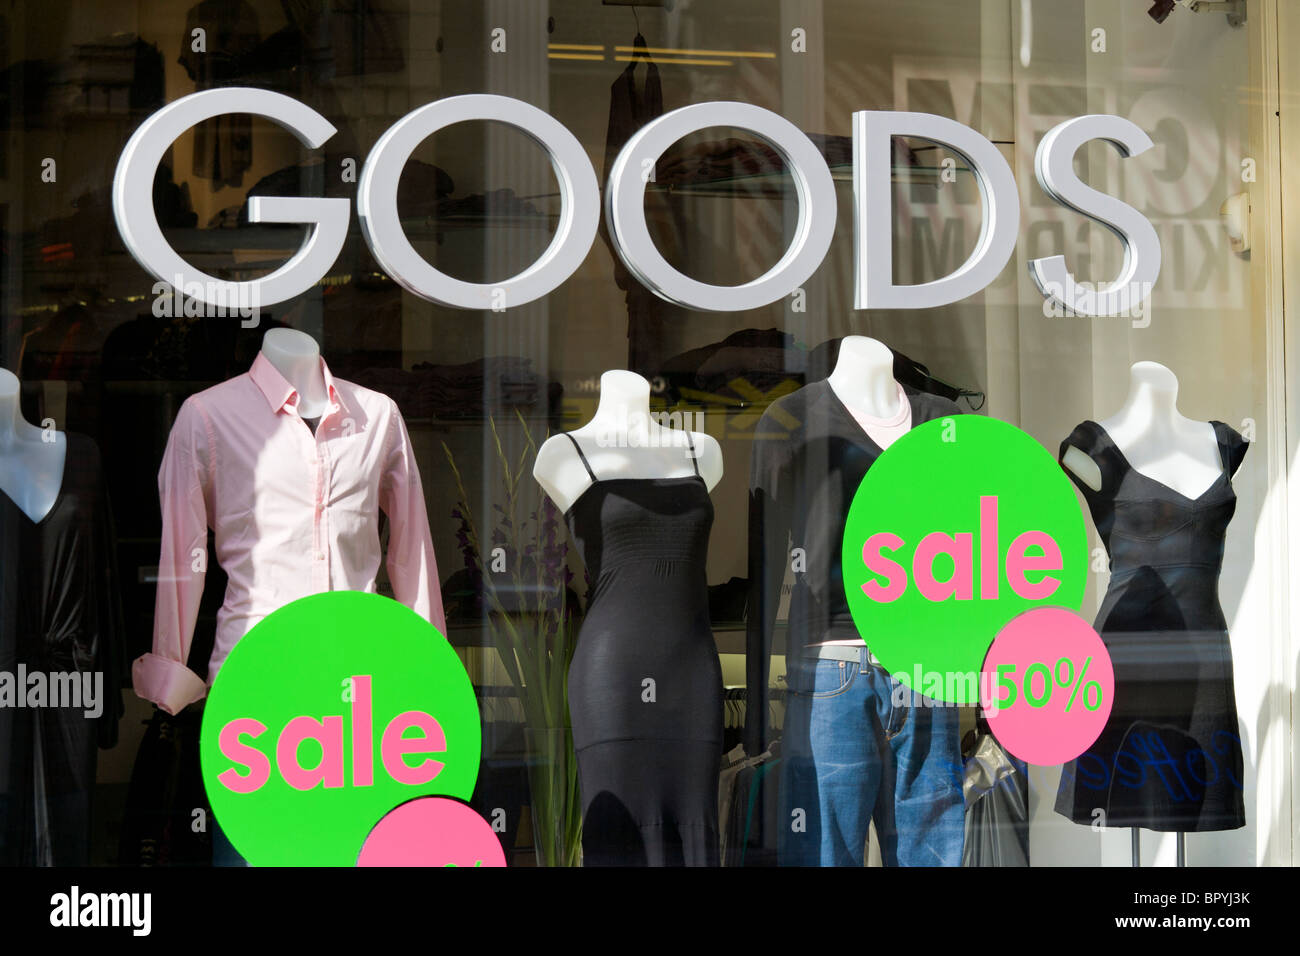 Summer Sale at Goods Casual at Huidenstraat 16, one of the 9 Little ...